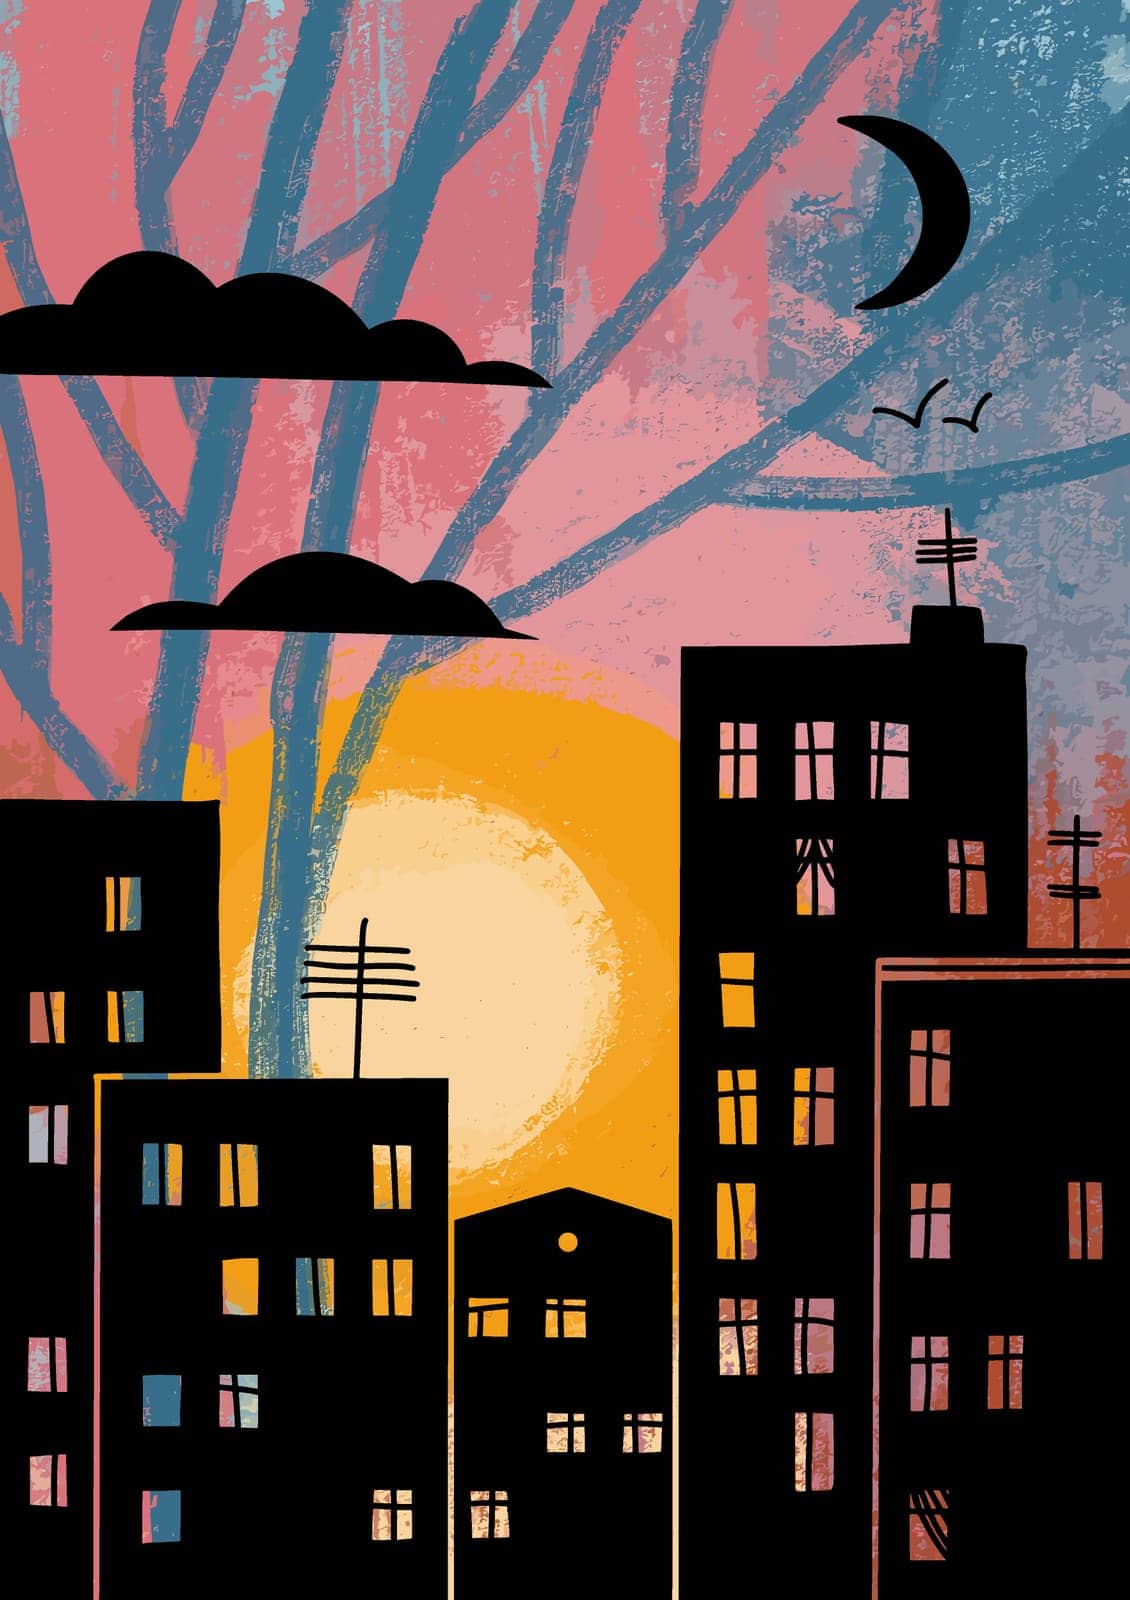 Stylized City Sunset Vertical Drawing. Black Silhouette on Pastel Colored Background. Night Background with Floating Crescent Moon, Flat Design Style Vector Illustration.